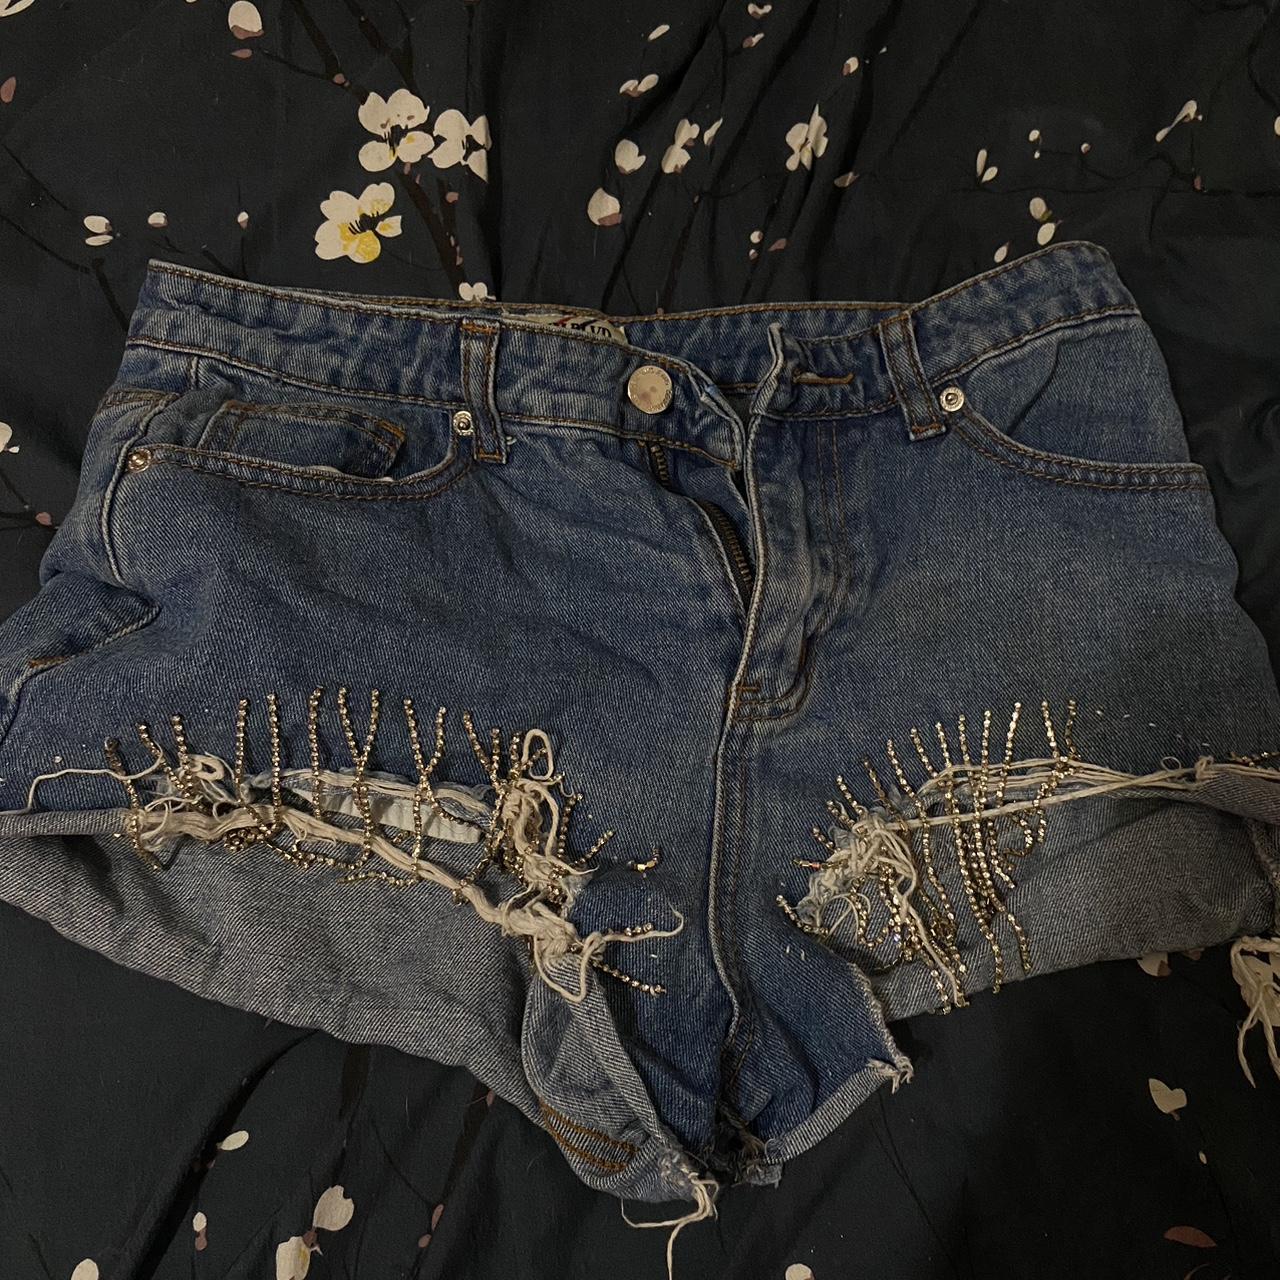 Washed Out Denim Booty Shorts🌞 ▪️FREE SHIPPING ON - Depop